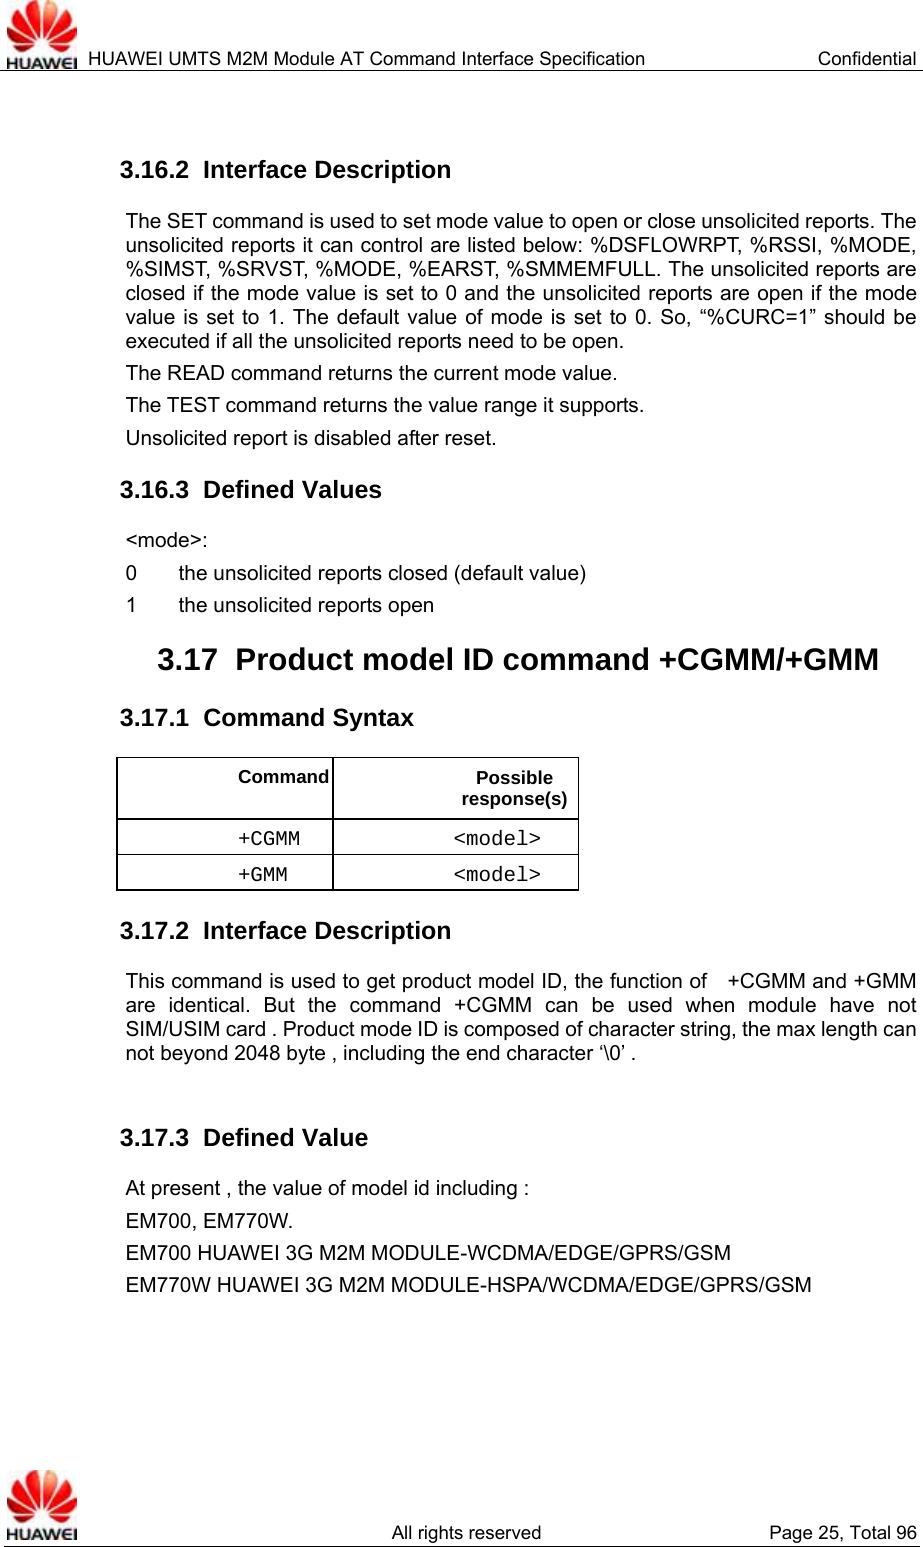  HUAWEI UMTS M2M Module AT Command Interface Specification  Confidential   All rights reserved  Page 25, Total 96  3.16.2  Interface Description The SET command is used to set mode value to open or close unsolicited reports. The unsolicited reports it can control are listed below: %DSFLOWRPT, %RSSI, %MODE, %SIMST, %SRVST, %MODE, %EARST, %SMMEMFULL. The unsolicited reports are closed if the mode value is set to 0 and the unsolicited reports are open if the mode value is set to 1. The default value of mode is set to 0. So, “%CURC=1” should be executed if all the unsolicited reports need to be open. The READ command returns the current mode value. The TEST command returns the value range it supports. Unsolicited report is disabled after reset. 3.16.3  Defined Values &lt;mode&gt;: 0        the unsolicited reports closed (default value) 1    the unsolicited reports open 3.17  Product model ID command +CGMM/+GMM   3.17.1  Command Syntax Command Possible response(s)+CGMM &lt;model&gt; +GMM &lt;model&gt; 3.17.2  Interface Description This command is used to get product model ID, the function of    +CGMM and +GMM are identical. But the command +CGMM can be used when module have not SIM/USIM card . Product mode ID is composed of character string, the max length can not beyond 2048 byte , including the end character ‘\0’ .    3.17.3  Defined Value At present , the value of model id including : EM700, EM770W. EM700 HUAWEI 3G M2M MODULE-WCDMA/EDGE/GPRS/GSM EM770W HUAWEI 3G M2M MODULE-HSPA/WCDMA/EDGE/GPRS/GSM 